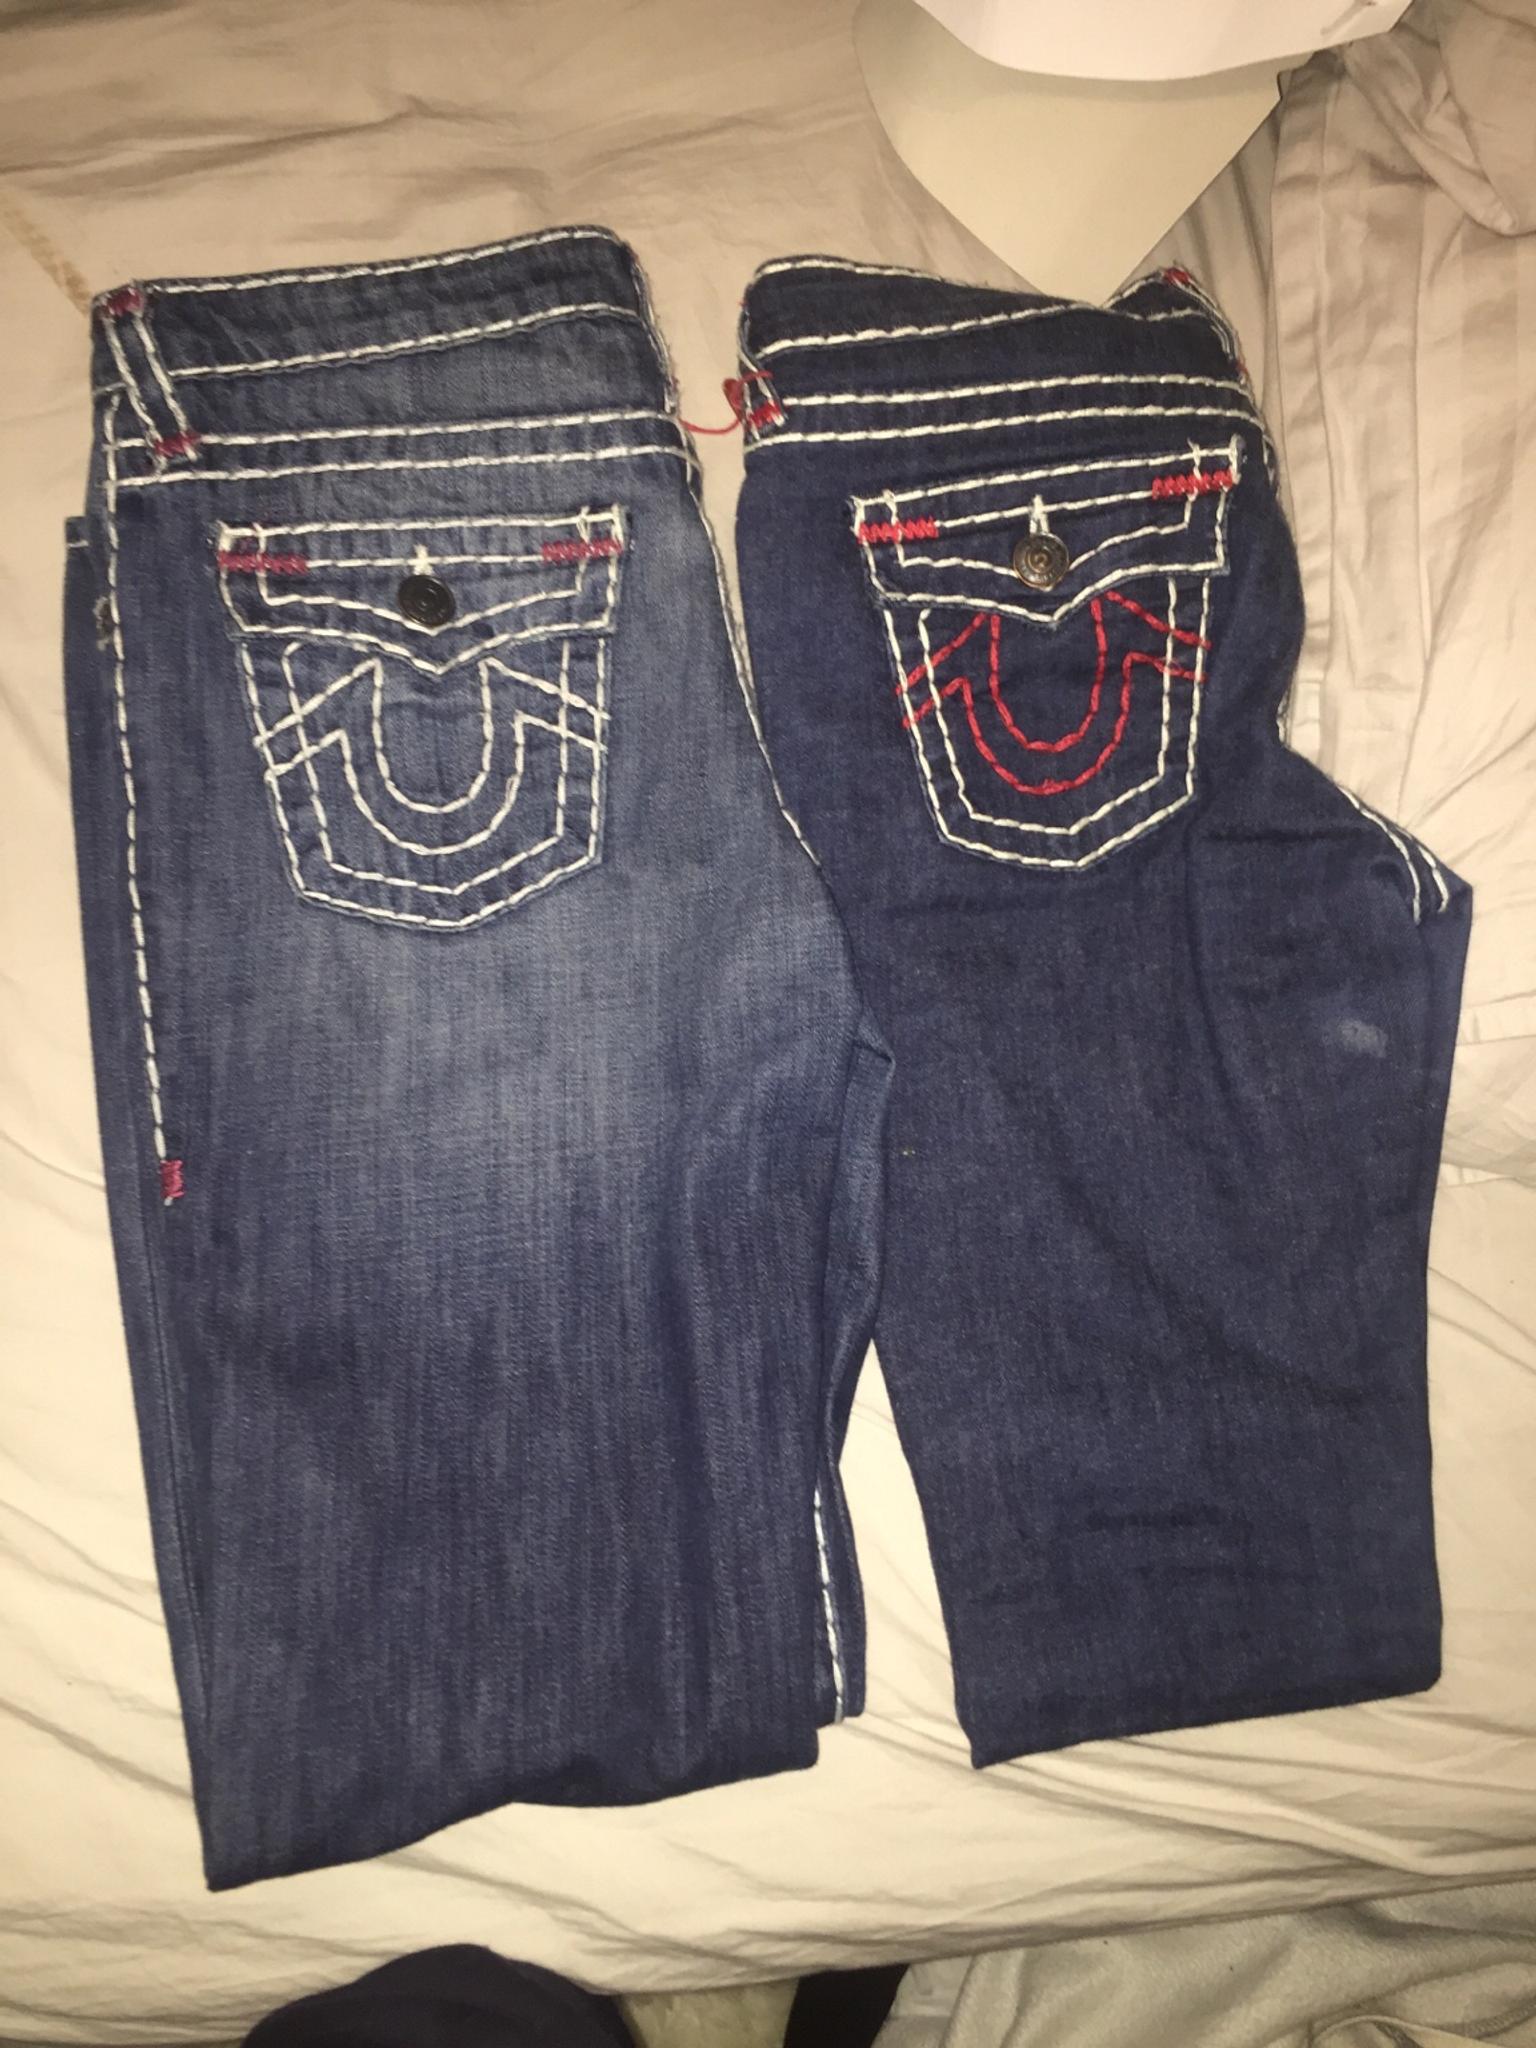 True religion jeans 16 years old in 